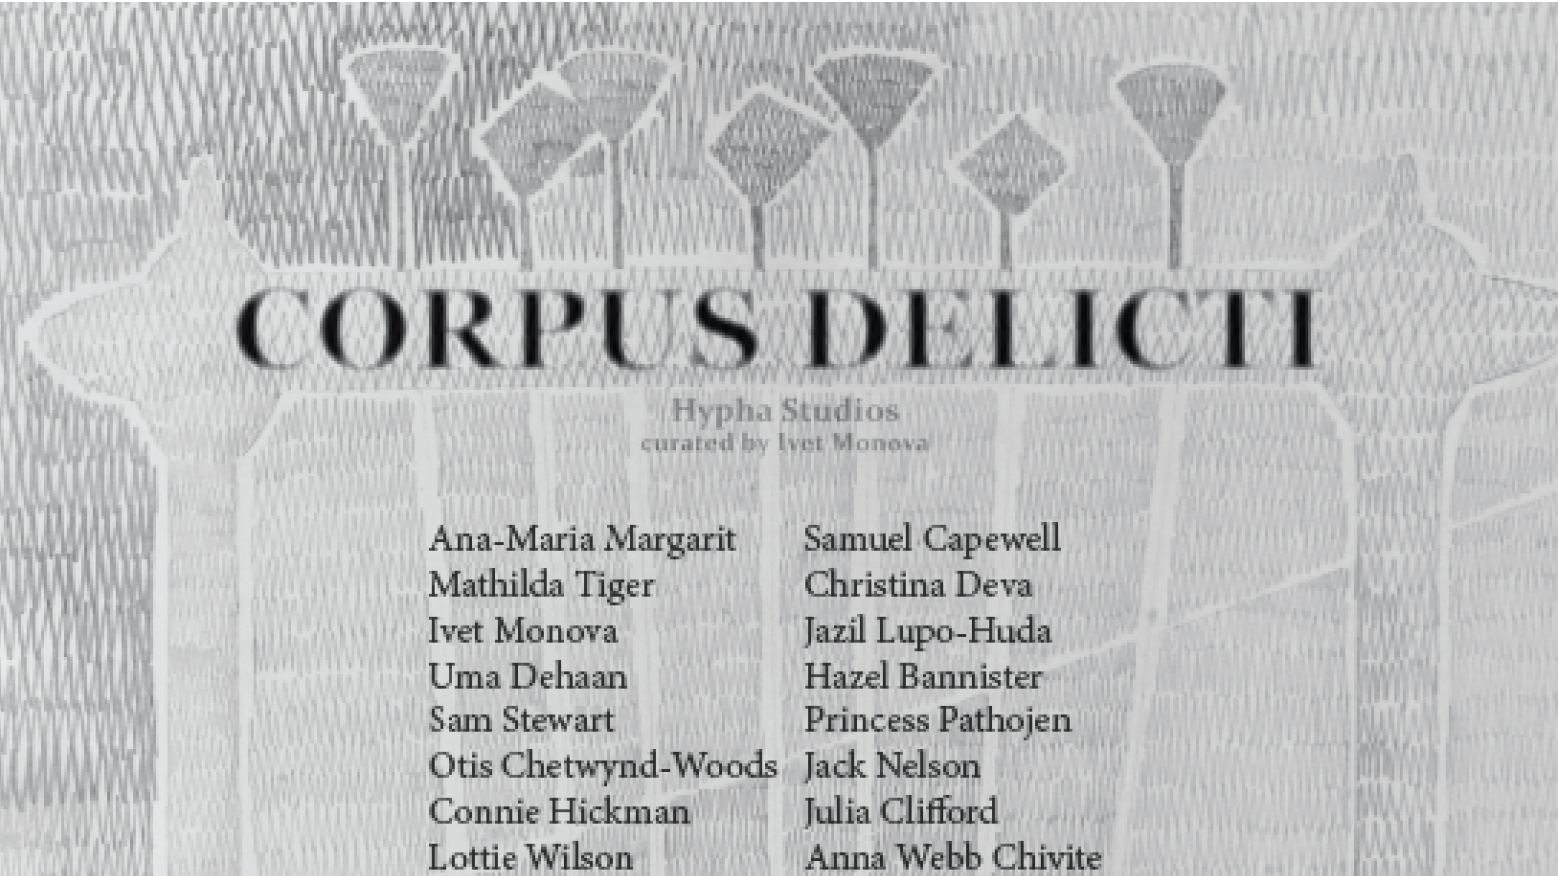 CORPUS DELICTI - curated by Ivet Monova